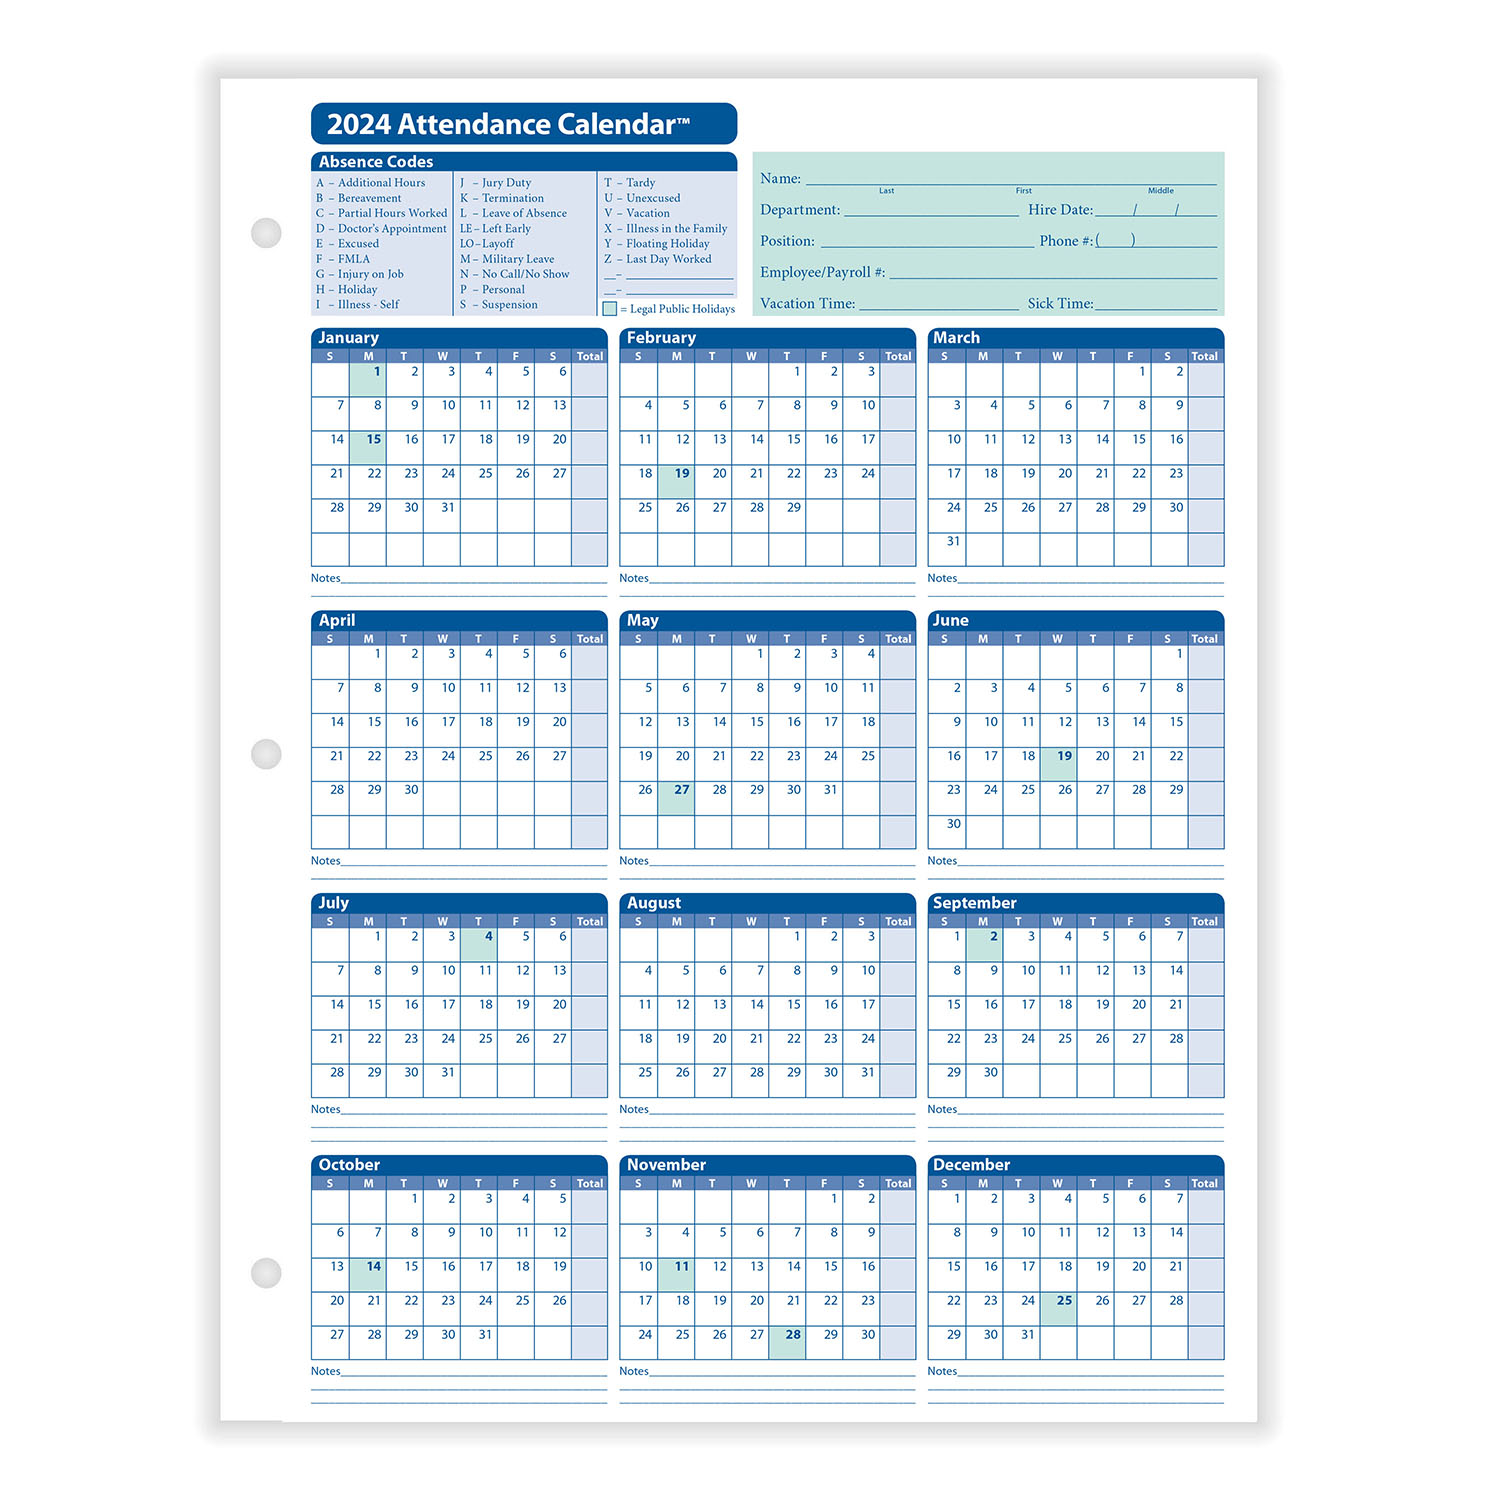 2024 Yearly Employee Attendance Calendar | Yearly Calendar | Hrdirect with regard to Employee Attendance Calendar 2024 Excel